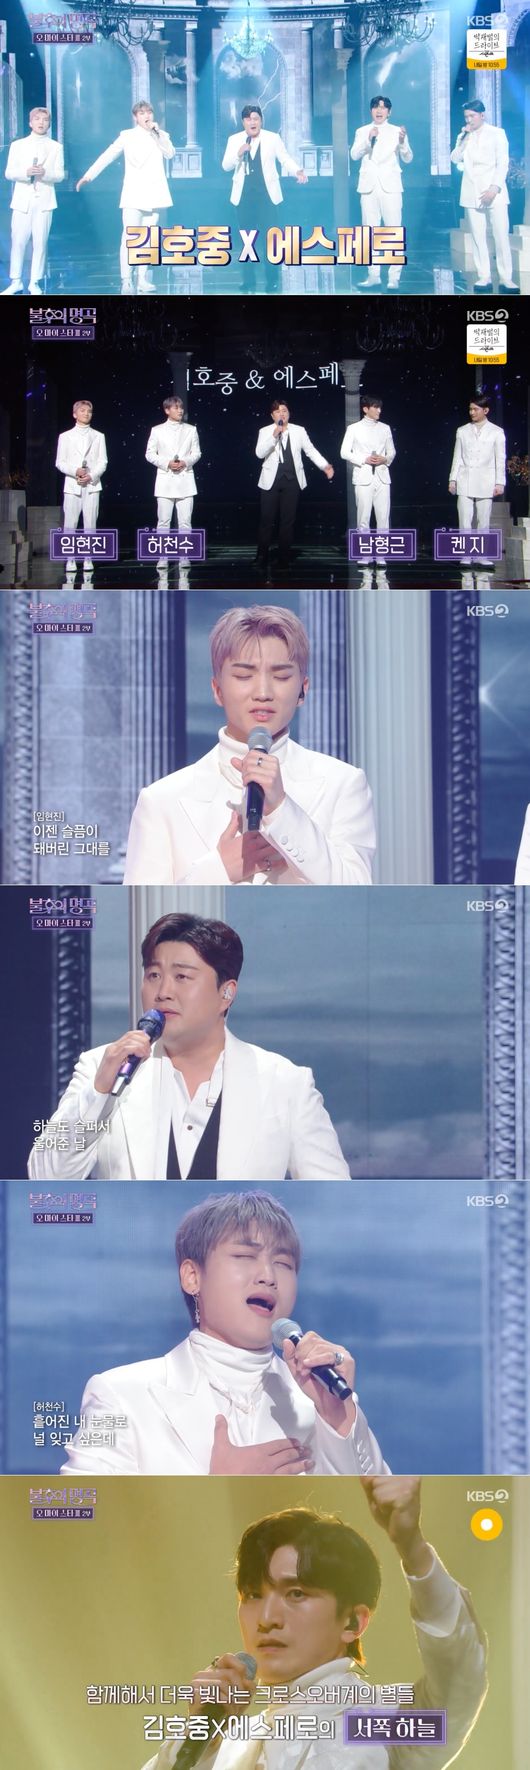 In  ⁇ Immortal Songs: Singing the Legend  ⁇ , Kim Ho-joong and espero created warmth as crossover senior singers.On the afternoon of the 11th, KBS 2TV entertainment program  ⁇  Immortal Songs: Singing the Legend  ⁇  featured two special features of Oh My Star.In Immortal Songs: Singing the Legend, Kim Ho-joong and espero won the championship.Kim Ho-joong and espero aka Hospero were accomplished with Kim Ho-joong planning to stage Immortal Songs: Singing the Legend with espero.Espero, a new crossover group, has been admiring Tvarotti Kim Ho-joong Kim Ho-joong gave espero the first stage of Immortal Songs: Singing the Legend.Previously, Kim Young-im and Yang Ji-eun captivated the audience with the charm of Korean traditional music, Immortal Songs: Singing the Legend. Kim Ho-joong and espero were selected as the last runners to take the stage.Kim Ho-joong personally introduced each of the espero members to the audience, saying, Immortal Songs: Singing the Legend.Your applause and shouting will relieve some of the tension, he said.In the full-scale stage, Kim Ho-joong and espero prepared Lee Seung-chuls famous song Western Sky. In front of the background reminiscent of the Greek temple, the magnificent singing of vocal music reminded me of opera.Beginning with the stable introduction of espero Lim Hyun-jin, the explosive treble and chords of Kenji, Nam Hyung-geun, and Heo Chun-soo were admired.Here Kim Ho-joong has arranged the espero song Endless part and showed the support shot for espero properly.After the stage of Kim Ho-joong and espero, a standing ovation was poured from the audience of Immortal Songs: Singing the Legend.Yurisangja member Lee Se-joon said, I melted my musical color well. Espero Your skills are outstanding, but you are still a rookie.Kim Ho-joong seems to have caught the center in the middle. In particular, musical actor Min Woo-hyuk said, Kim Ho-joong was a fan since he first appeared on the air. I was so coveted when I was a musical actor. I liked it so much.Through this stage, I was able to stand out to my juniors and I was against the idea that I was a very good person. Hong Jin-young added, I wanted to put Kim Ho-joong in the mouth I wanted to eat before. On the other hand, espero member Kenji said, Immortal Songs: Singing the Legend on the first stage, I was so thrilled that I was tearful after the stage.When Kim So-hyun appeared in Immortal Songs: Singing the Legend in 2019, I participated in the chorus from behind, and then my thoughts flashed by and I felt emotional.The biggest thing was that it was an honor to be able to breathe with Kim Ho-joong Kim Ho-joong said, Although espero debuted only two months ago, my passion for music has more repertoire than me.I also took the trophy to my first appearance in Immortal Songs: Singing the Legend, so I invited espero in 2023 to hope that espero would fly a lot more. Thanks to this support, Kim Ho-joong and espero won the title in Immortal Songs: Singing the Legend.Providing KBS.